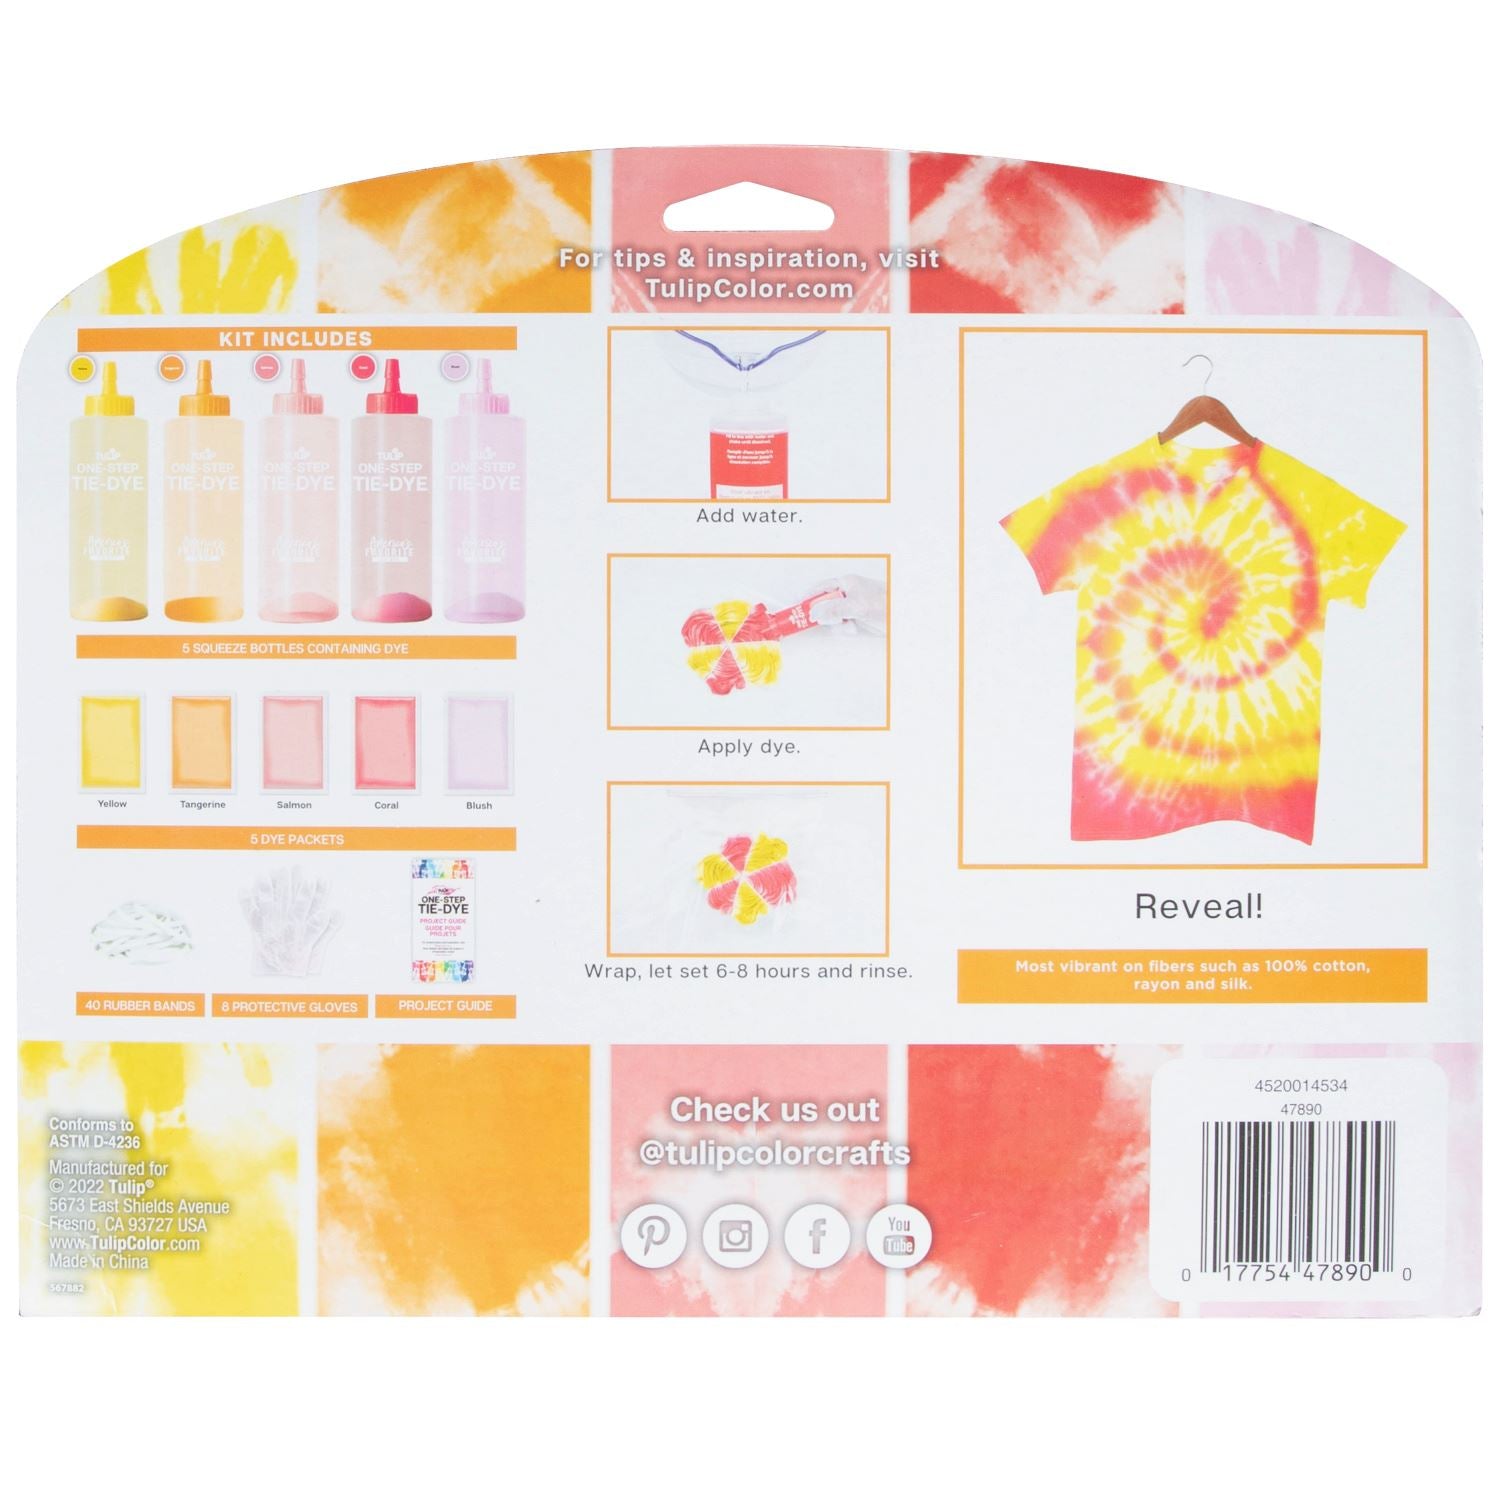 Tulip Over The Rainbow 15-Color One-Step Tie Dye Kit